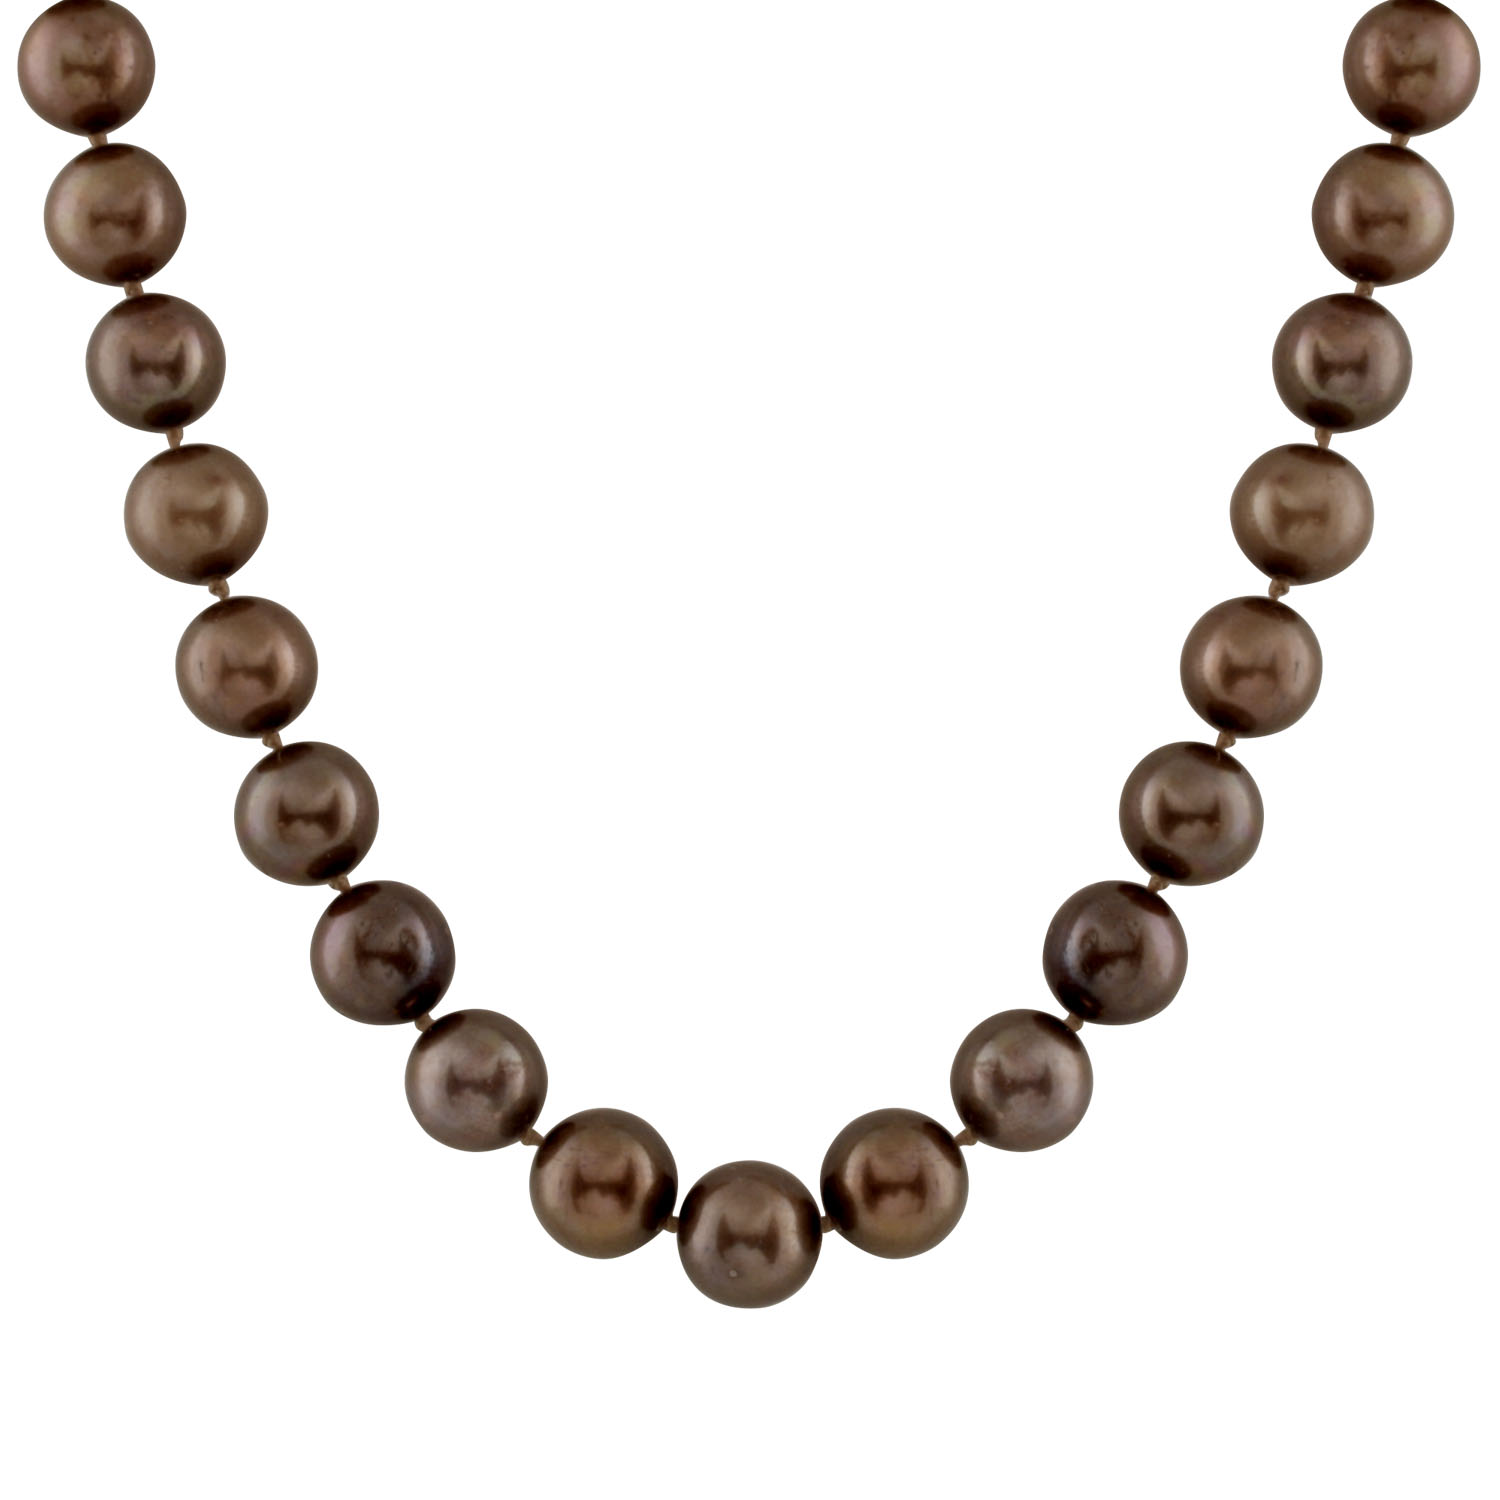 New chocolate necklace with gold clasp.